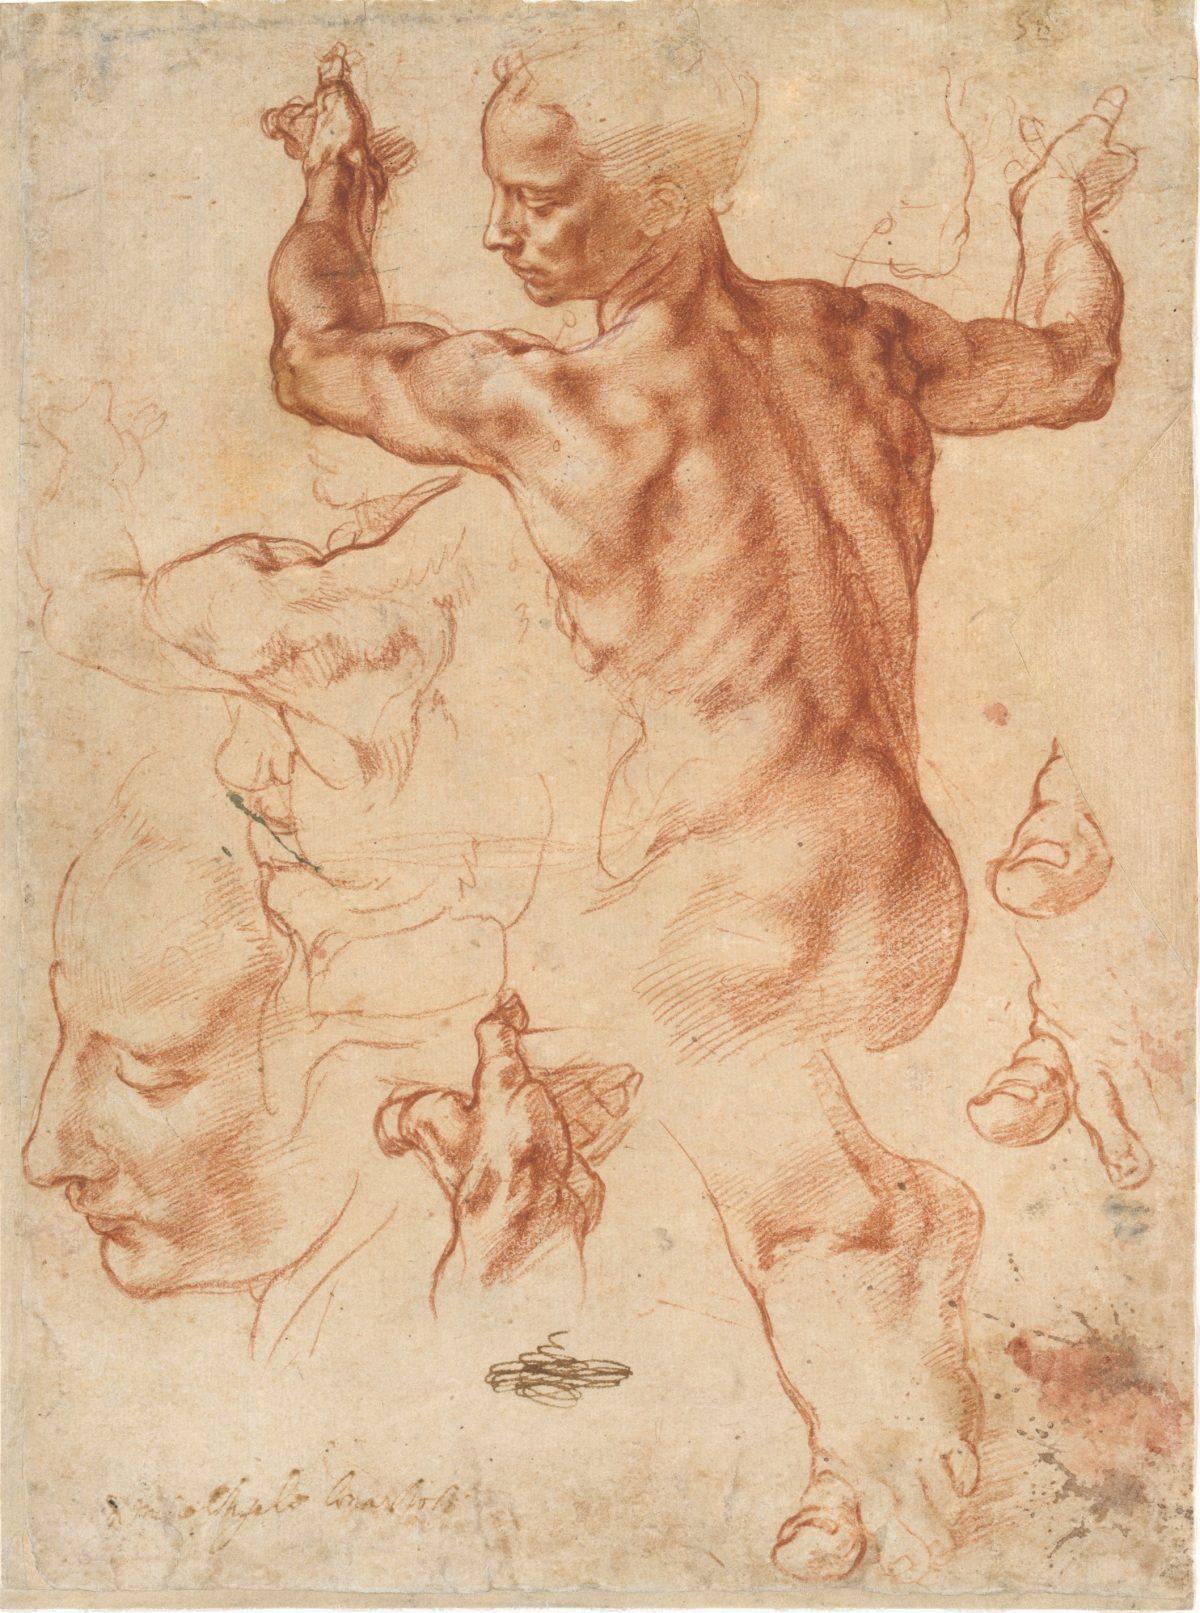 Studies for the Libyan Sibyl, circa 1510–1511, by Michelangelo Buonarroti (1475–1564). Red chalk, with small accents of white chalk on the left shoulder of the figure, sheet. 11 3/8 inches by 8 7/16 inches. The Metropolitan Museum of Art, purchase, Joseph Pulitzer bequest. (The Metropolitan Museum of Art)